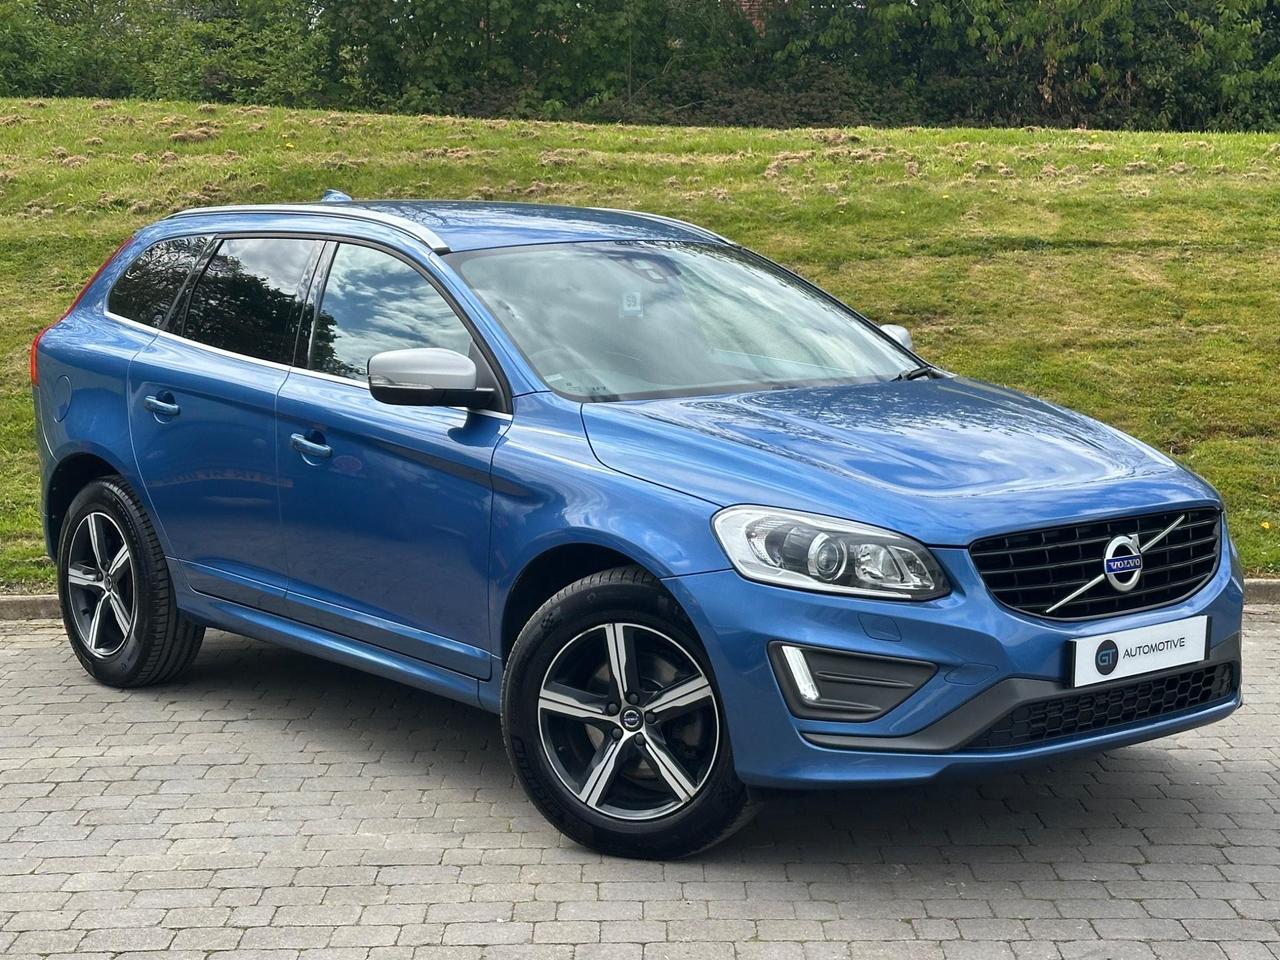 XC60 2.4 D5 R-Design Lux Nav SUV 5dr Diesel Auto AWD Euro 6 (s/s) (220 ps) Main Image